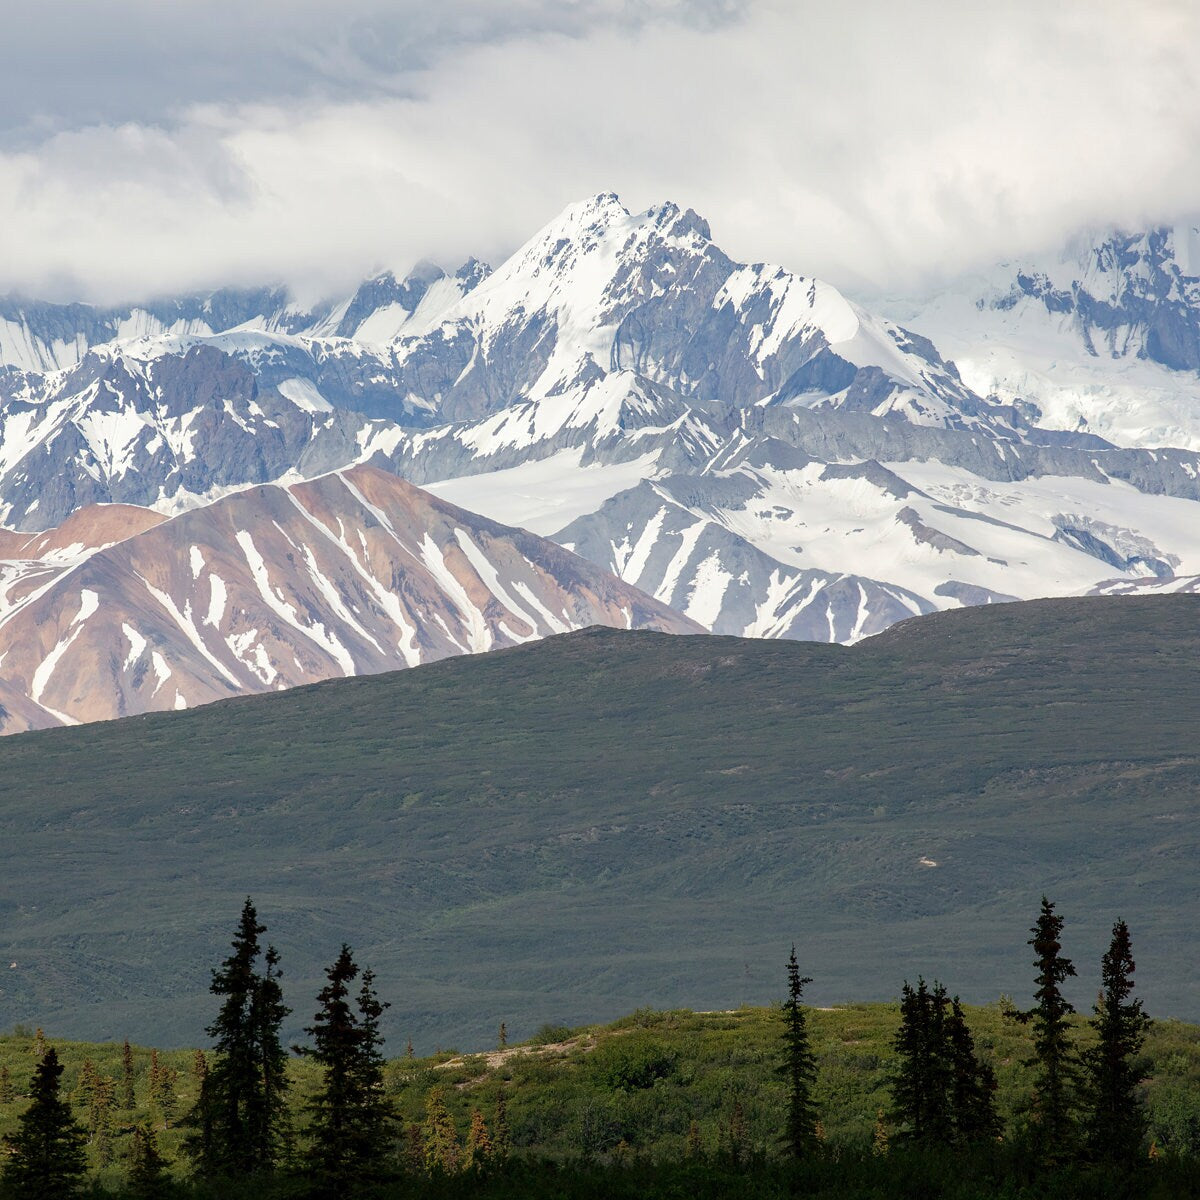 Alaska photo print, Denali Highway mountains photo, mountain photography, wall art decor, large paper or canvas picture, 5x7 to 40x60"